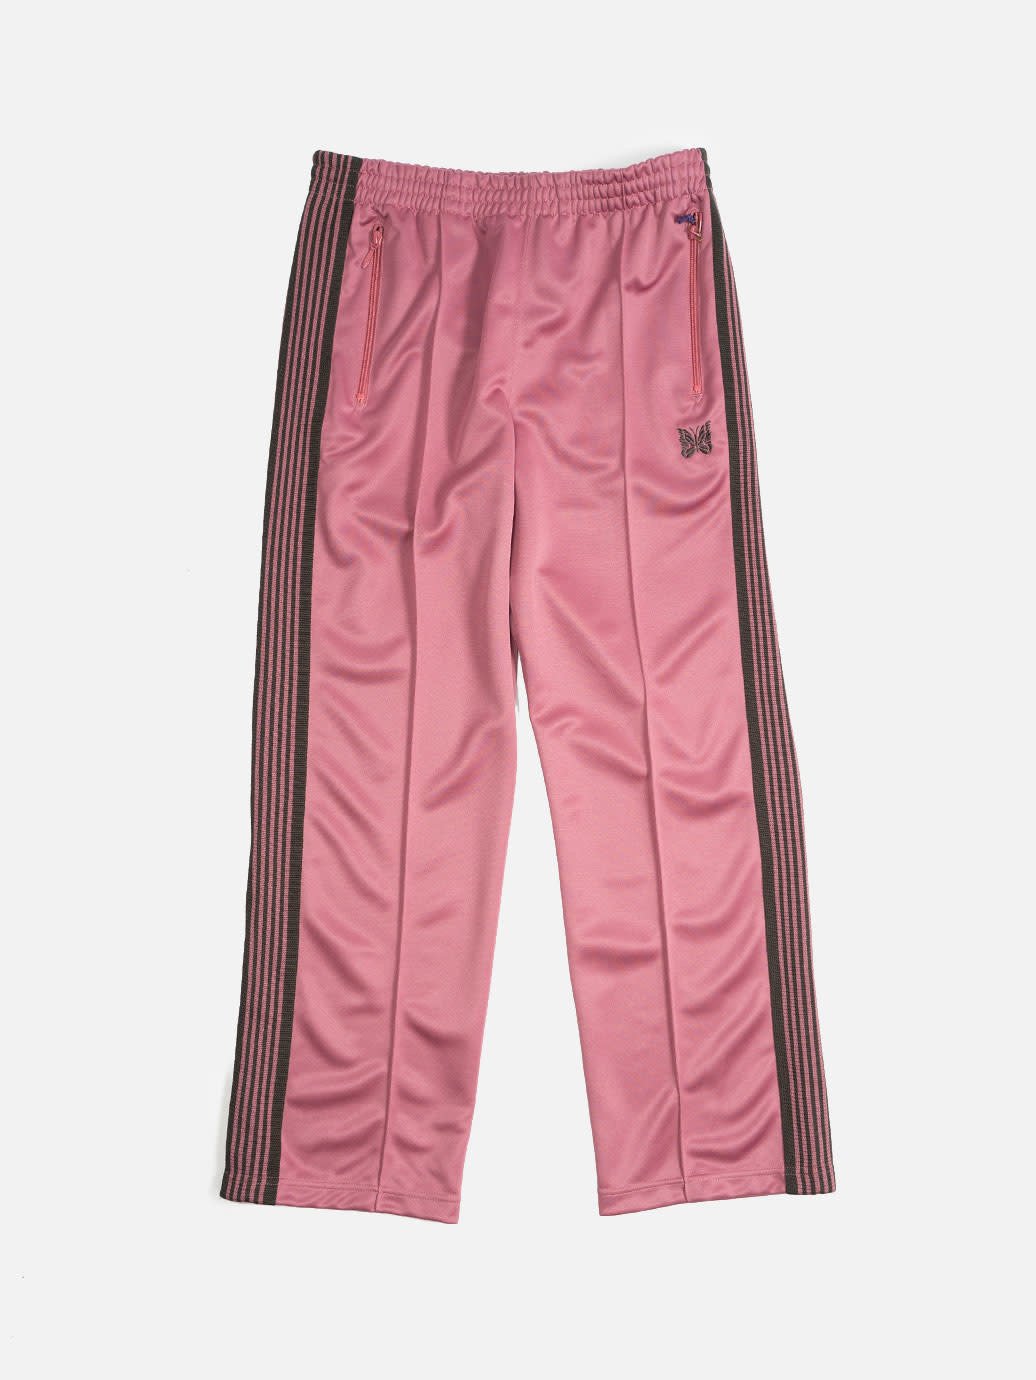 Quality Embroidered Needles Track Pants Classic Stripe Trousers